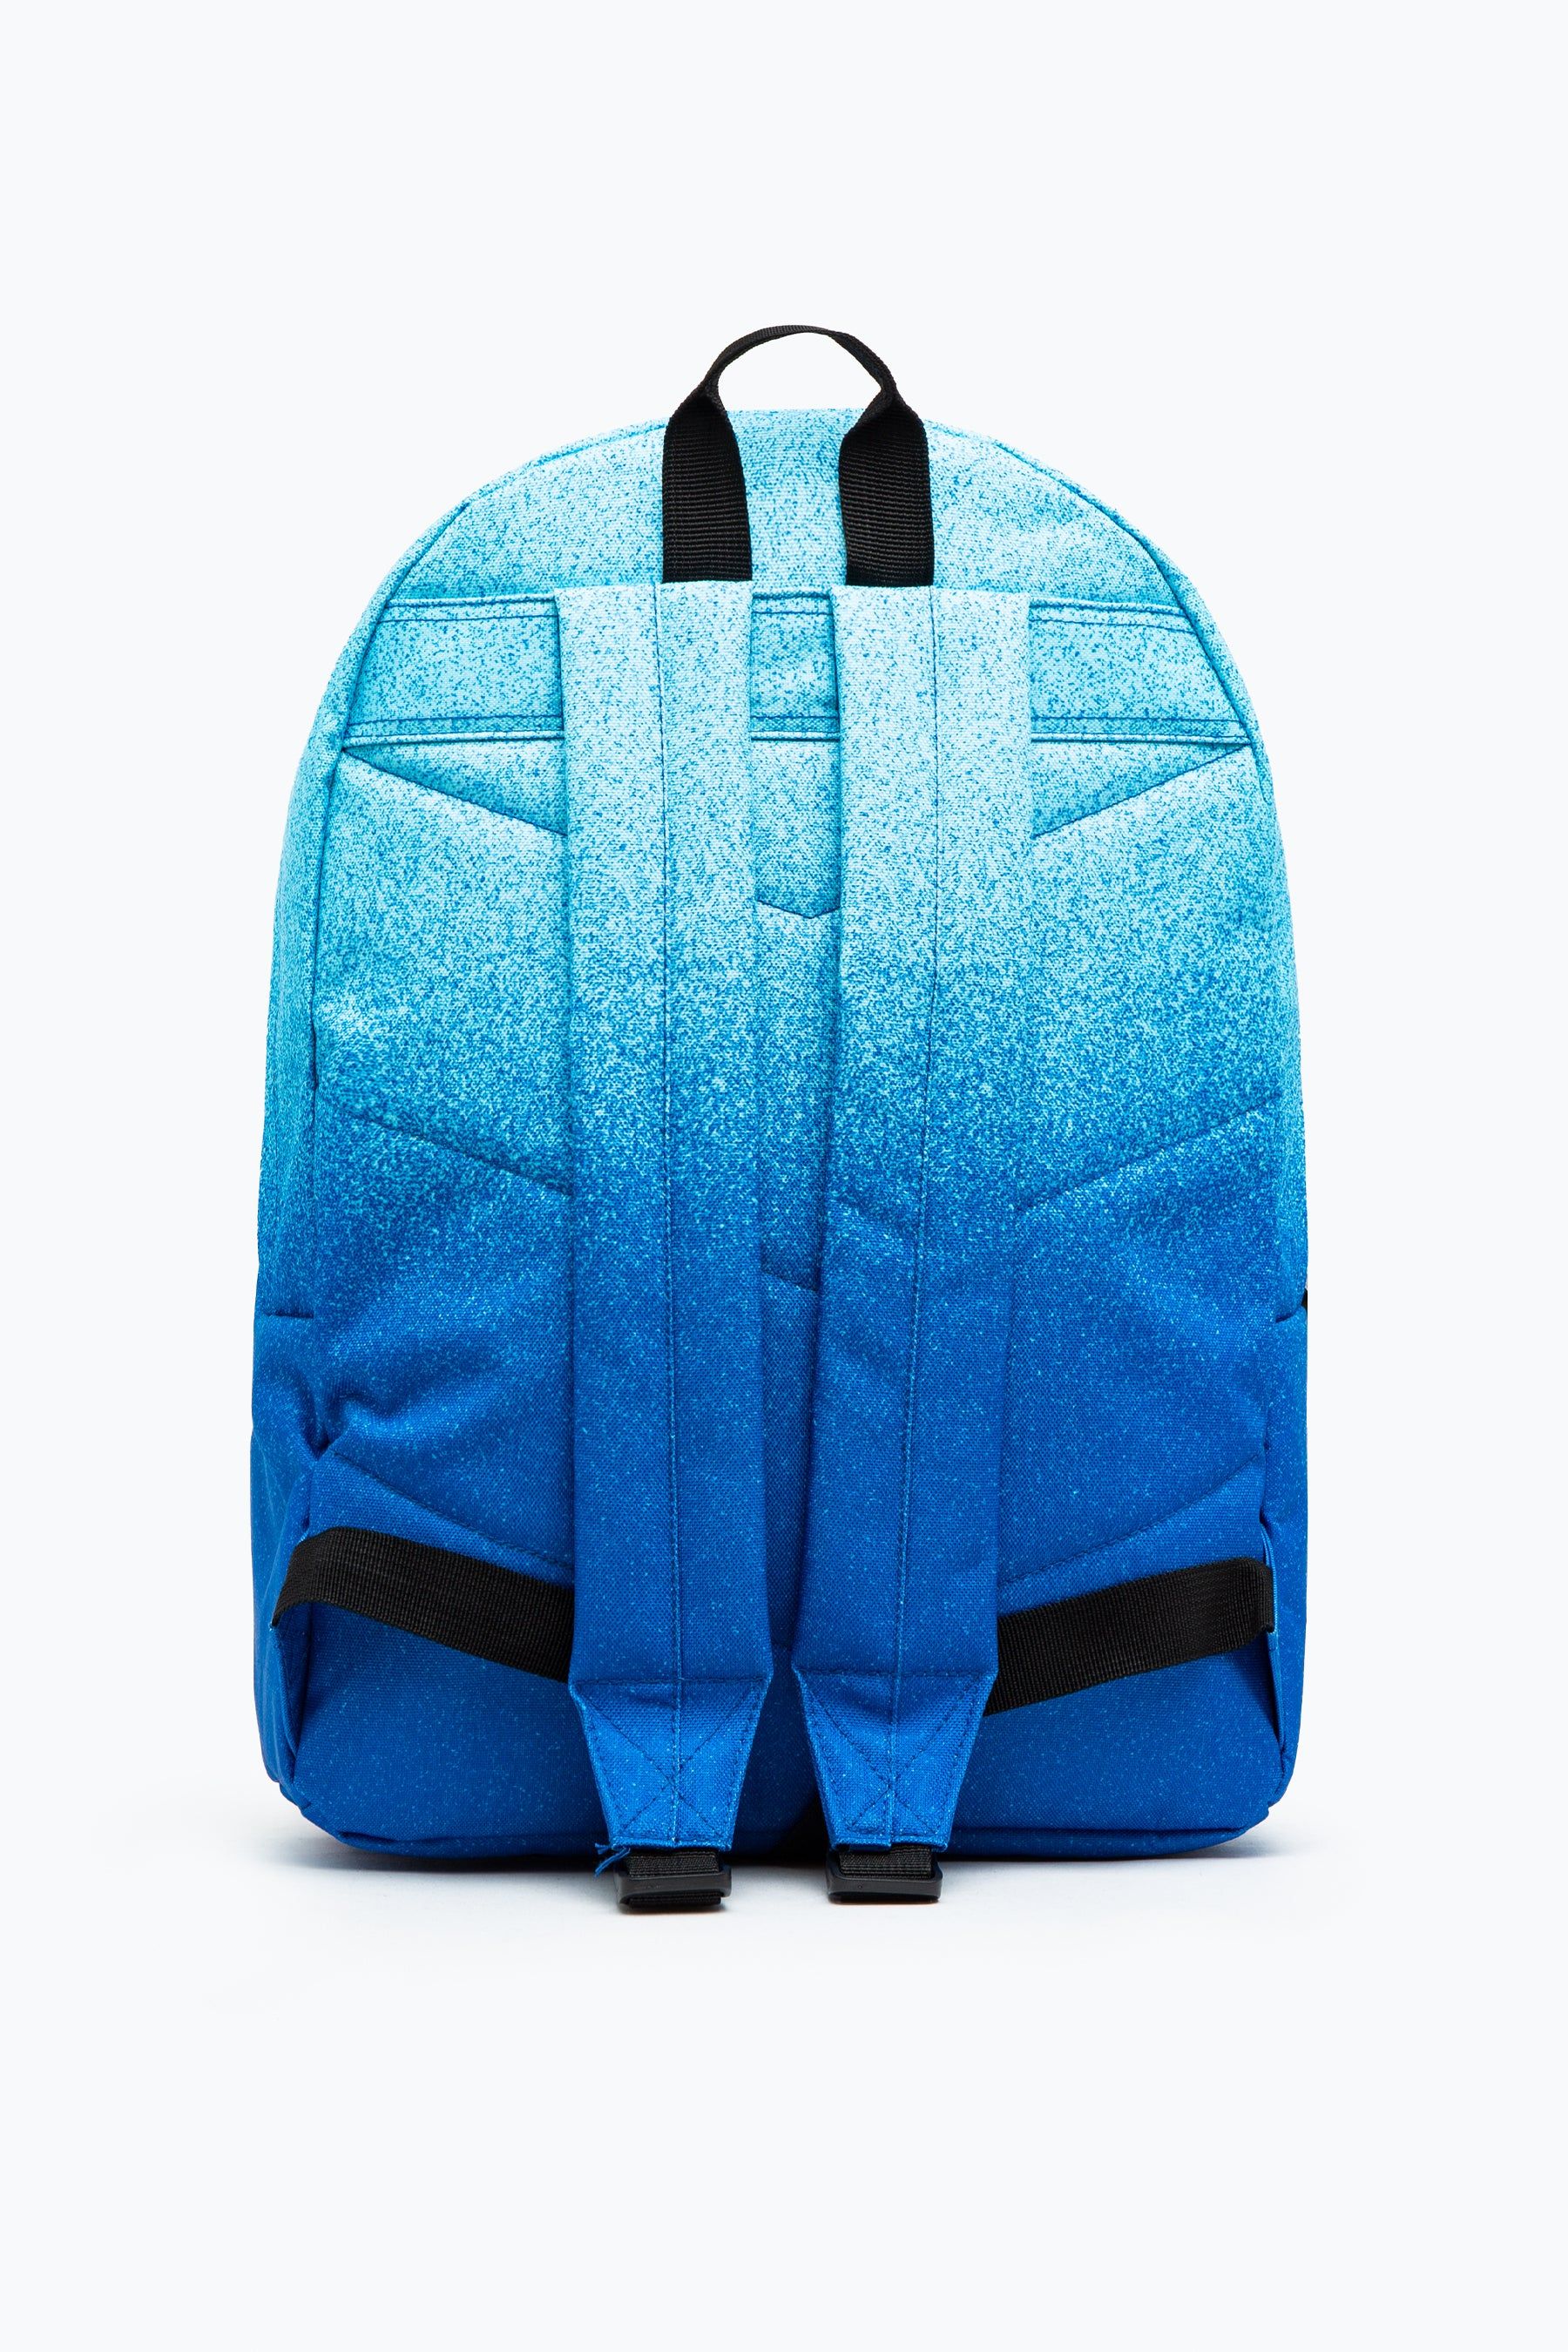 Let us introduce you to the HYPE. Blue Speckle Fade Backpack. Designed in our standard unisex backpack shape and design, measuring at 42cms x 30cms x 12cms, this is the perfect size to transport your matching pencil case, lunch bag and P.E kit. Finished with a front mini pocket, grab handle, embossed zips, branded inside lining and the iconic HYPE. crest badge in monochrome on the front. The straps offer supreme comfort with just the right amount of padding. Wipe clean only.